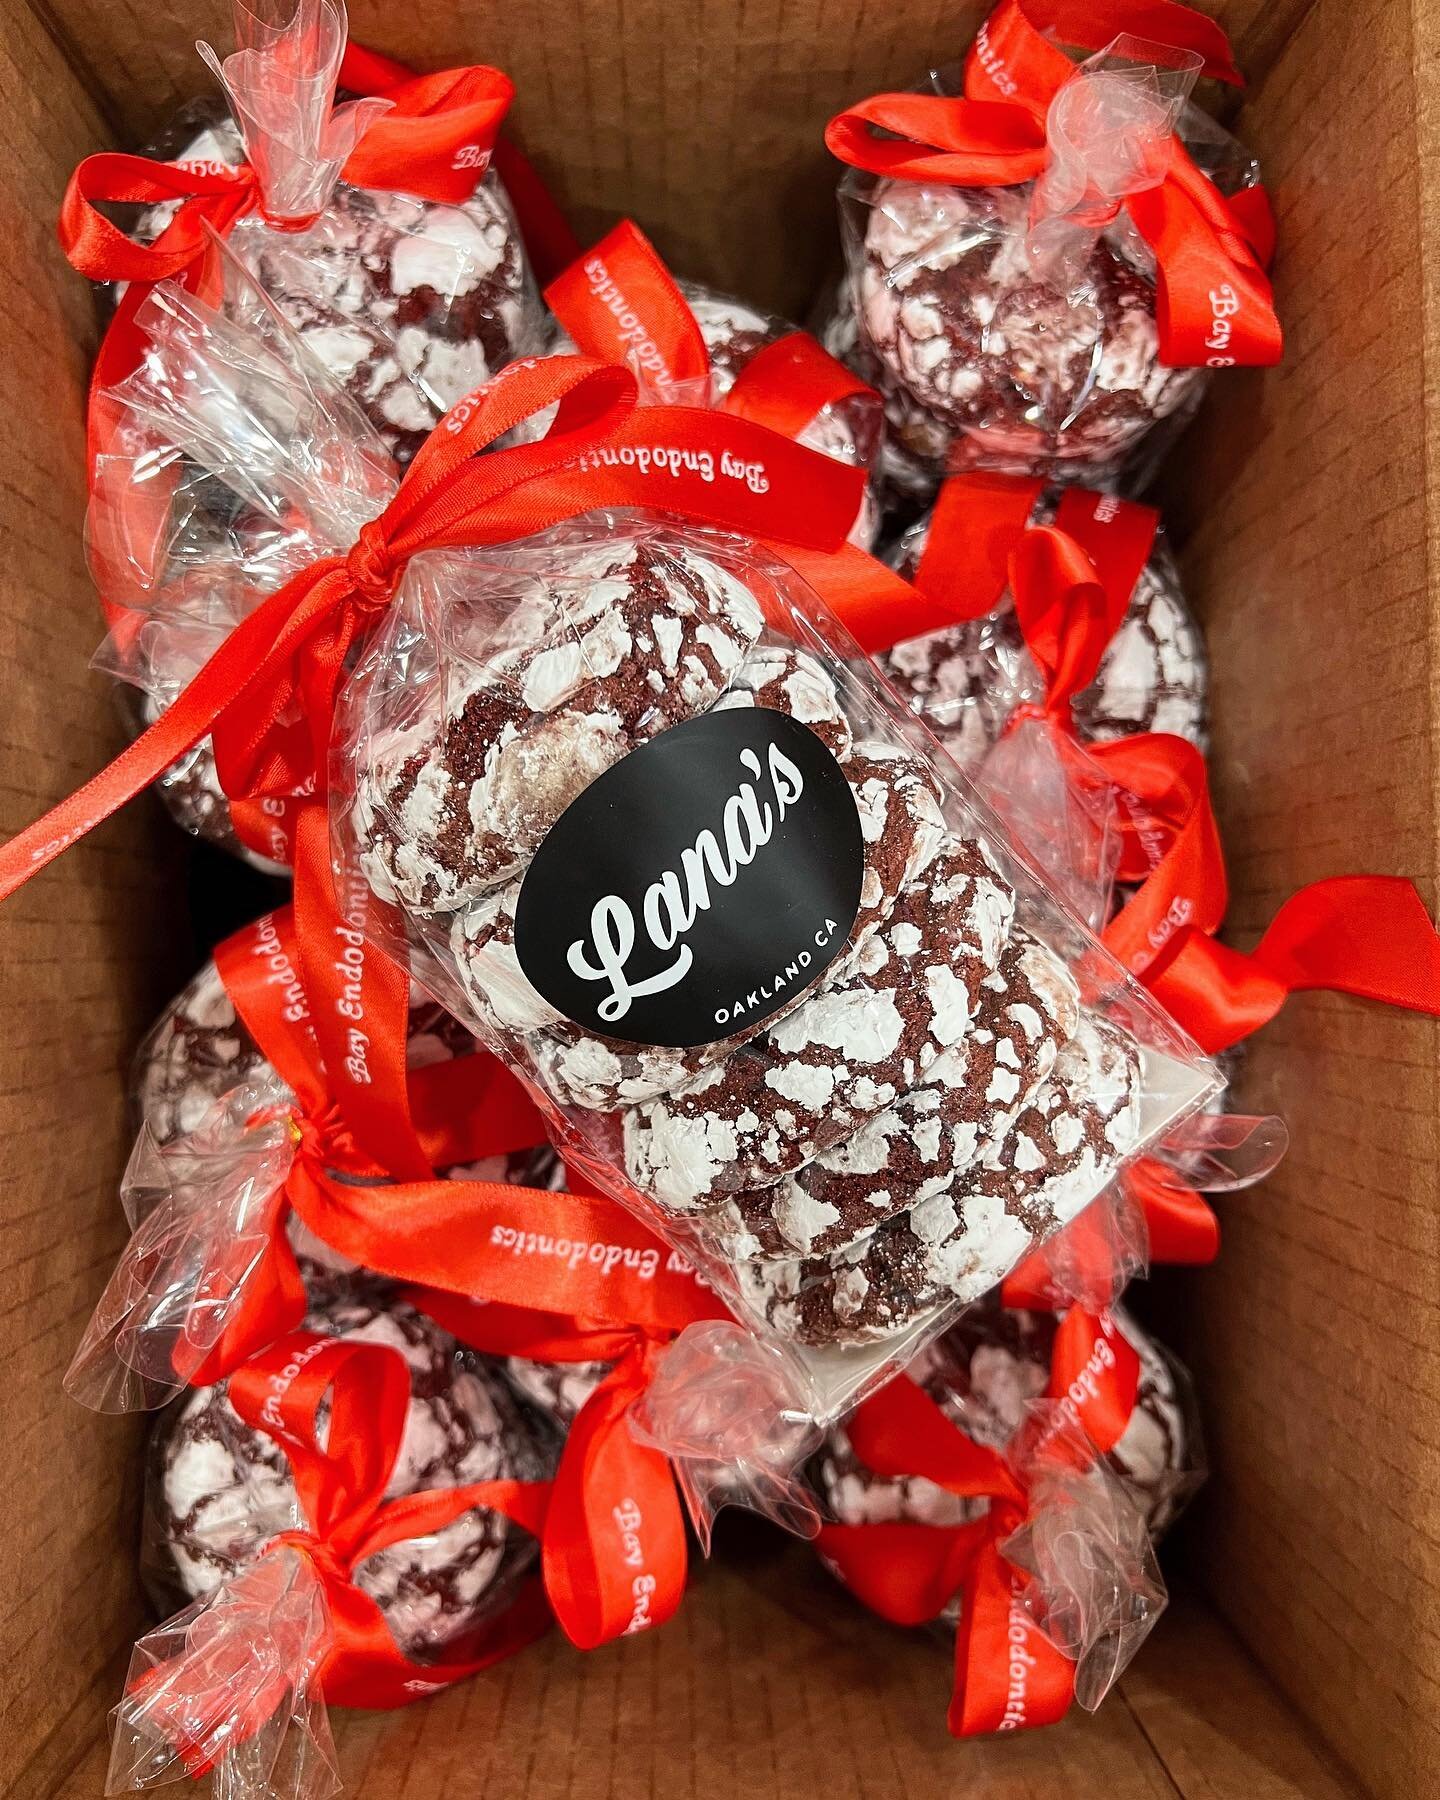 Red Velvet Crinkle Cookies are back! Just in time for Valentine&rsquo;s Day 😍 Limited availability this weekend, we recommend you pre-order! 🍪❤️
.
.
.
.
.
.
.
.
.
.
.
#lanasoakland #supportsmallbusiness #oakland #bayareaeats #bayarea #dessert #cook